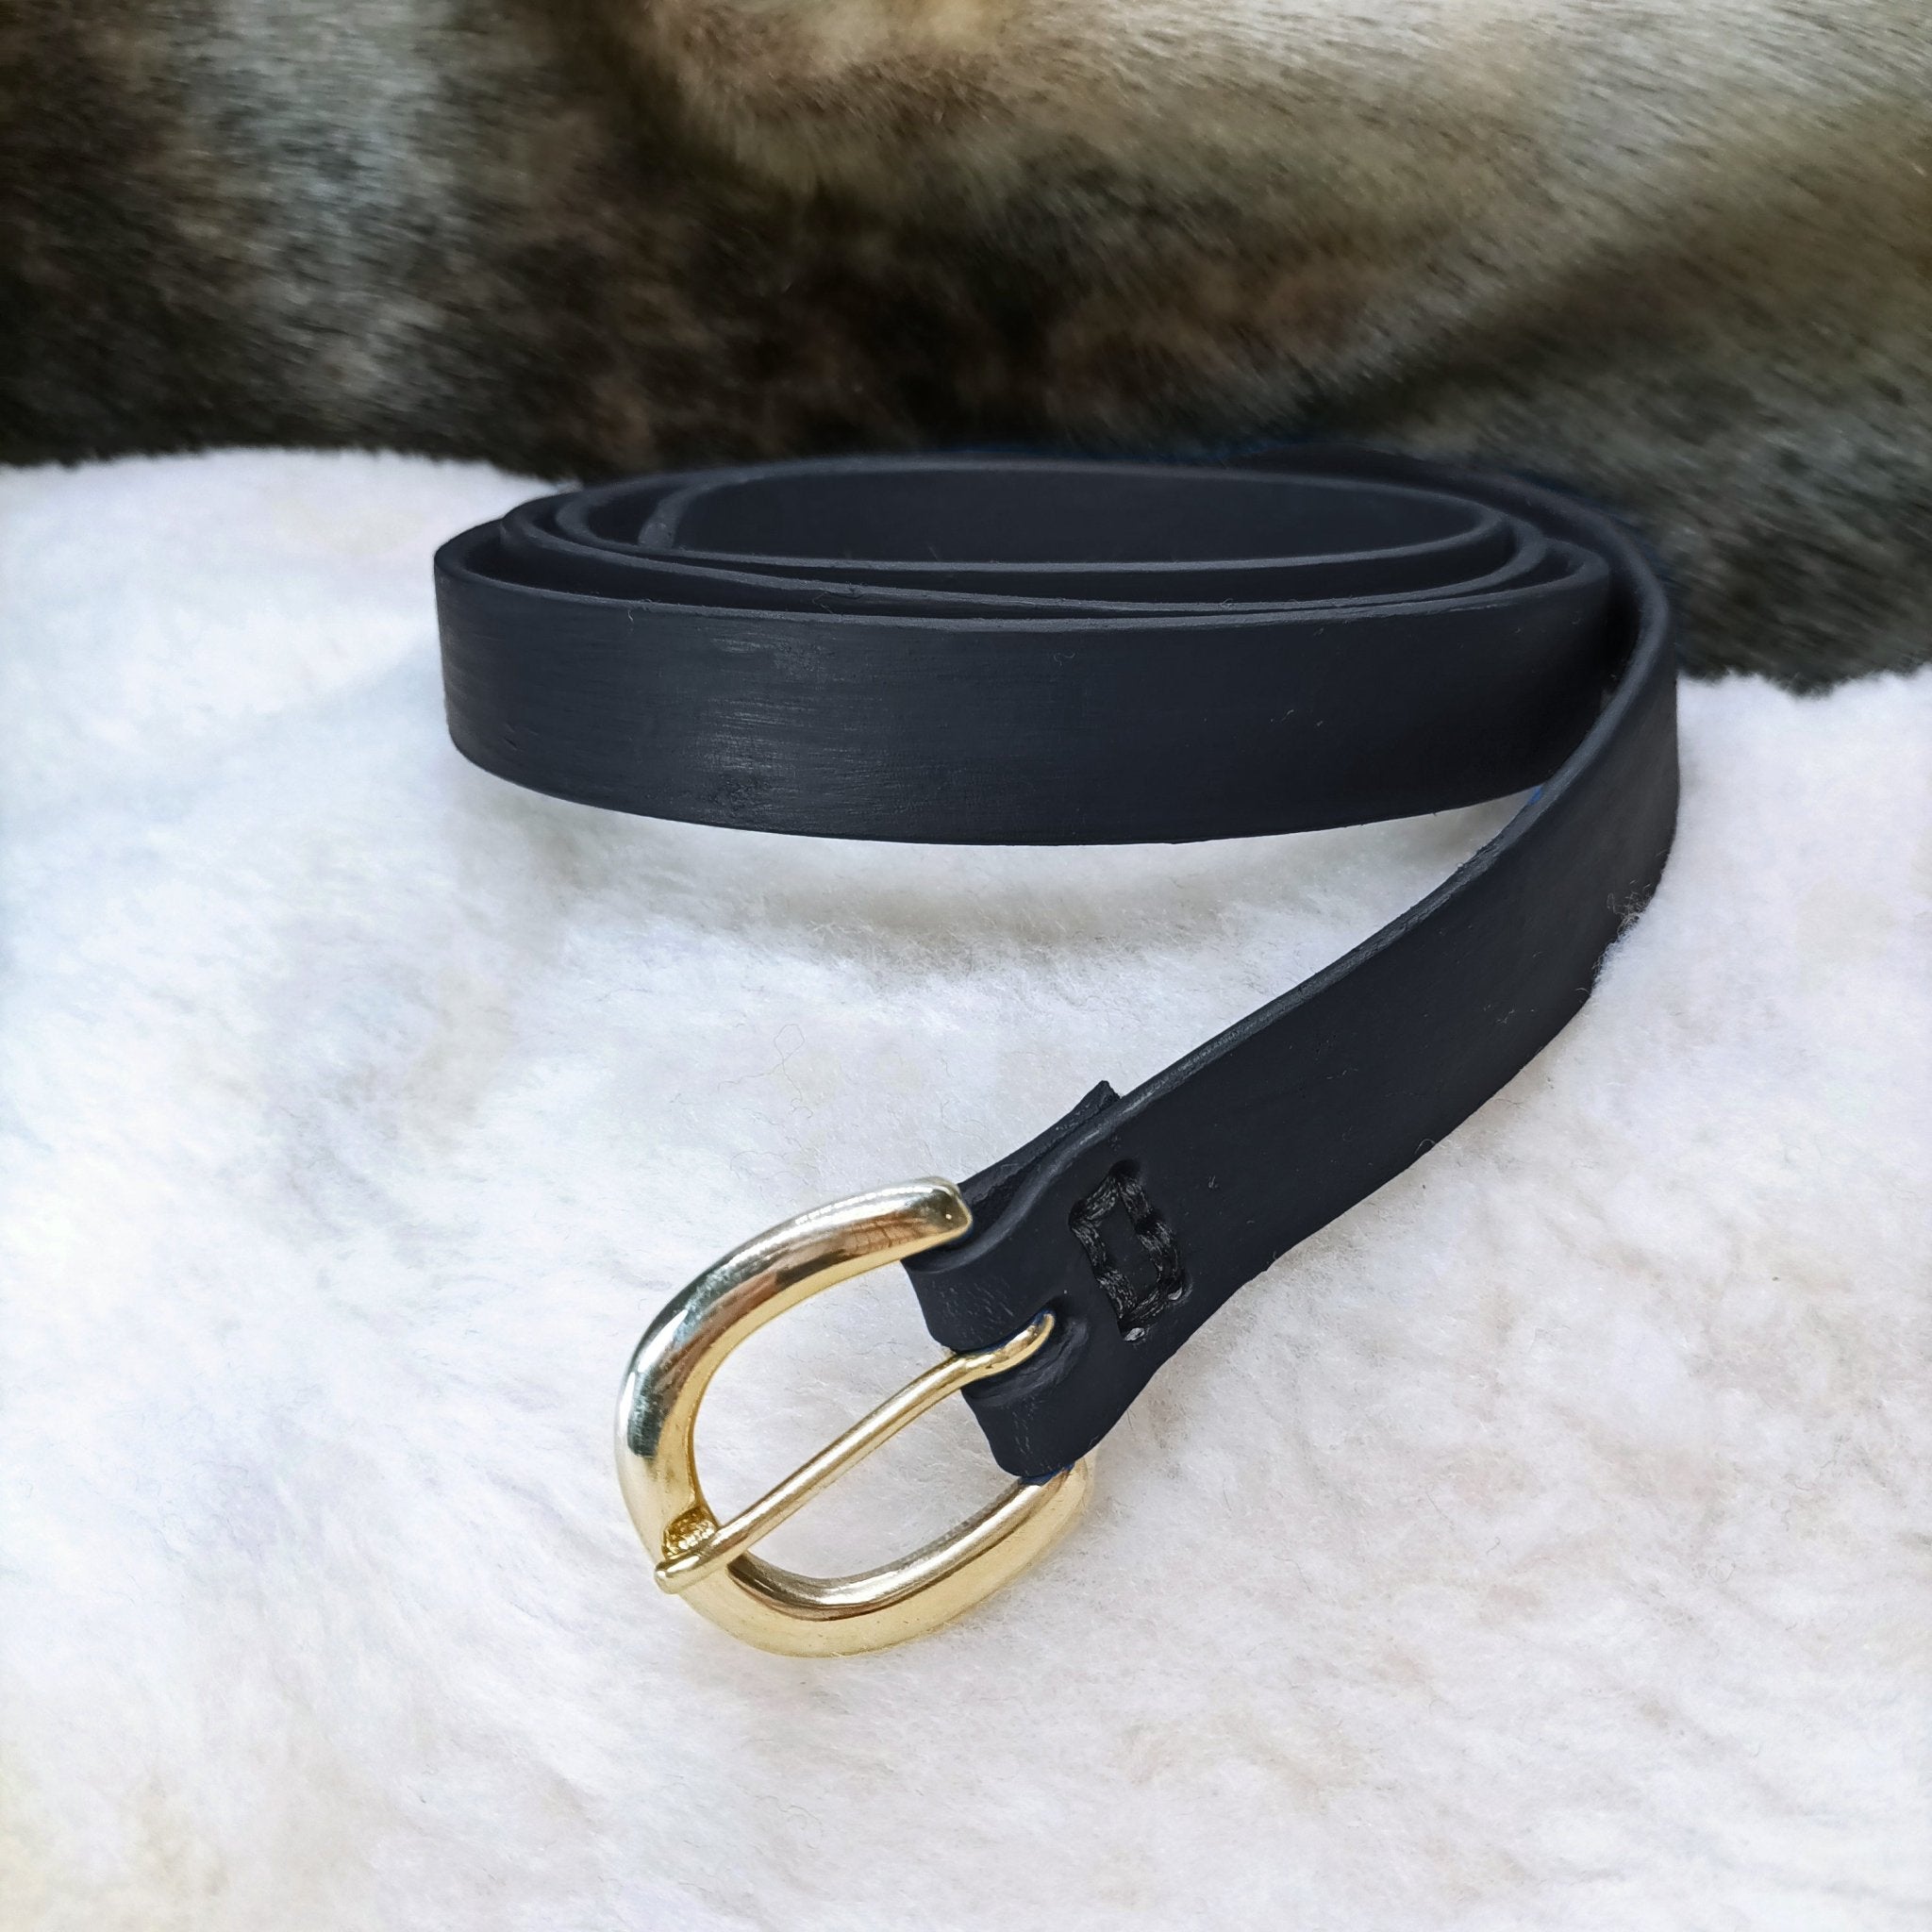 25mm Wide Long Black Leather Viking Belt with Brass Buckle